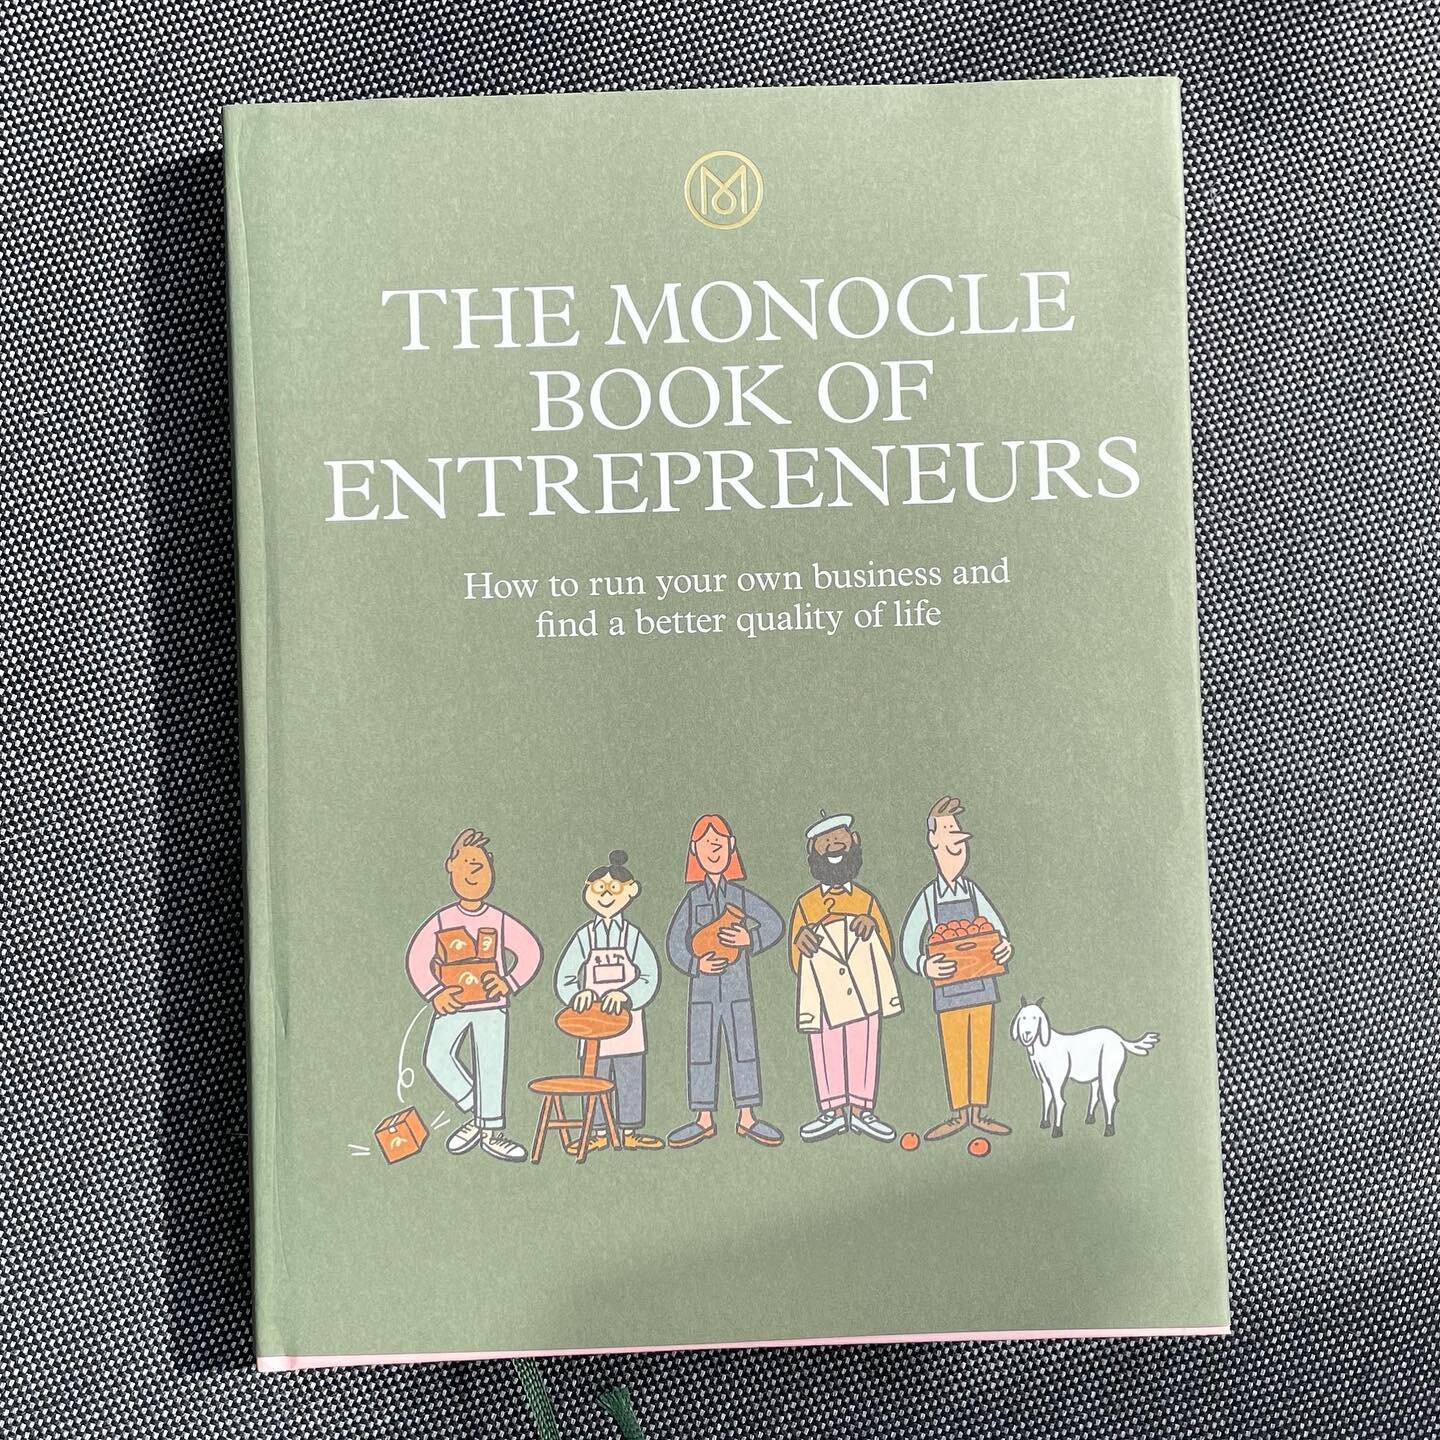 Inspiration: for the entrepreneurs out there! A great read full of expert advise from funding to branding to community building. Plus a 100 success stories to inspire you into action! Beautifully designed and written &mdash; Monocles Book of Entrepre